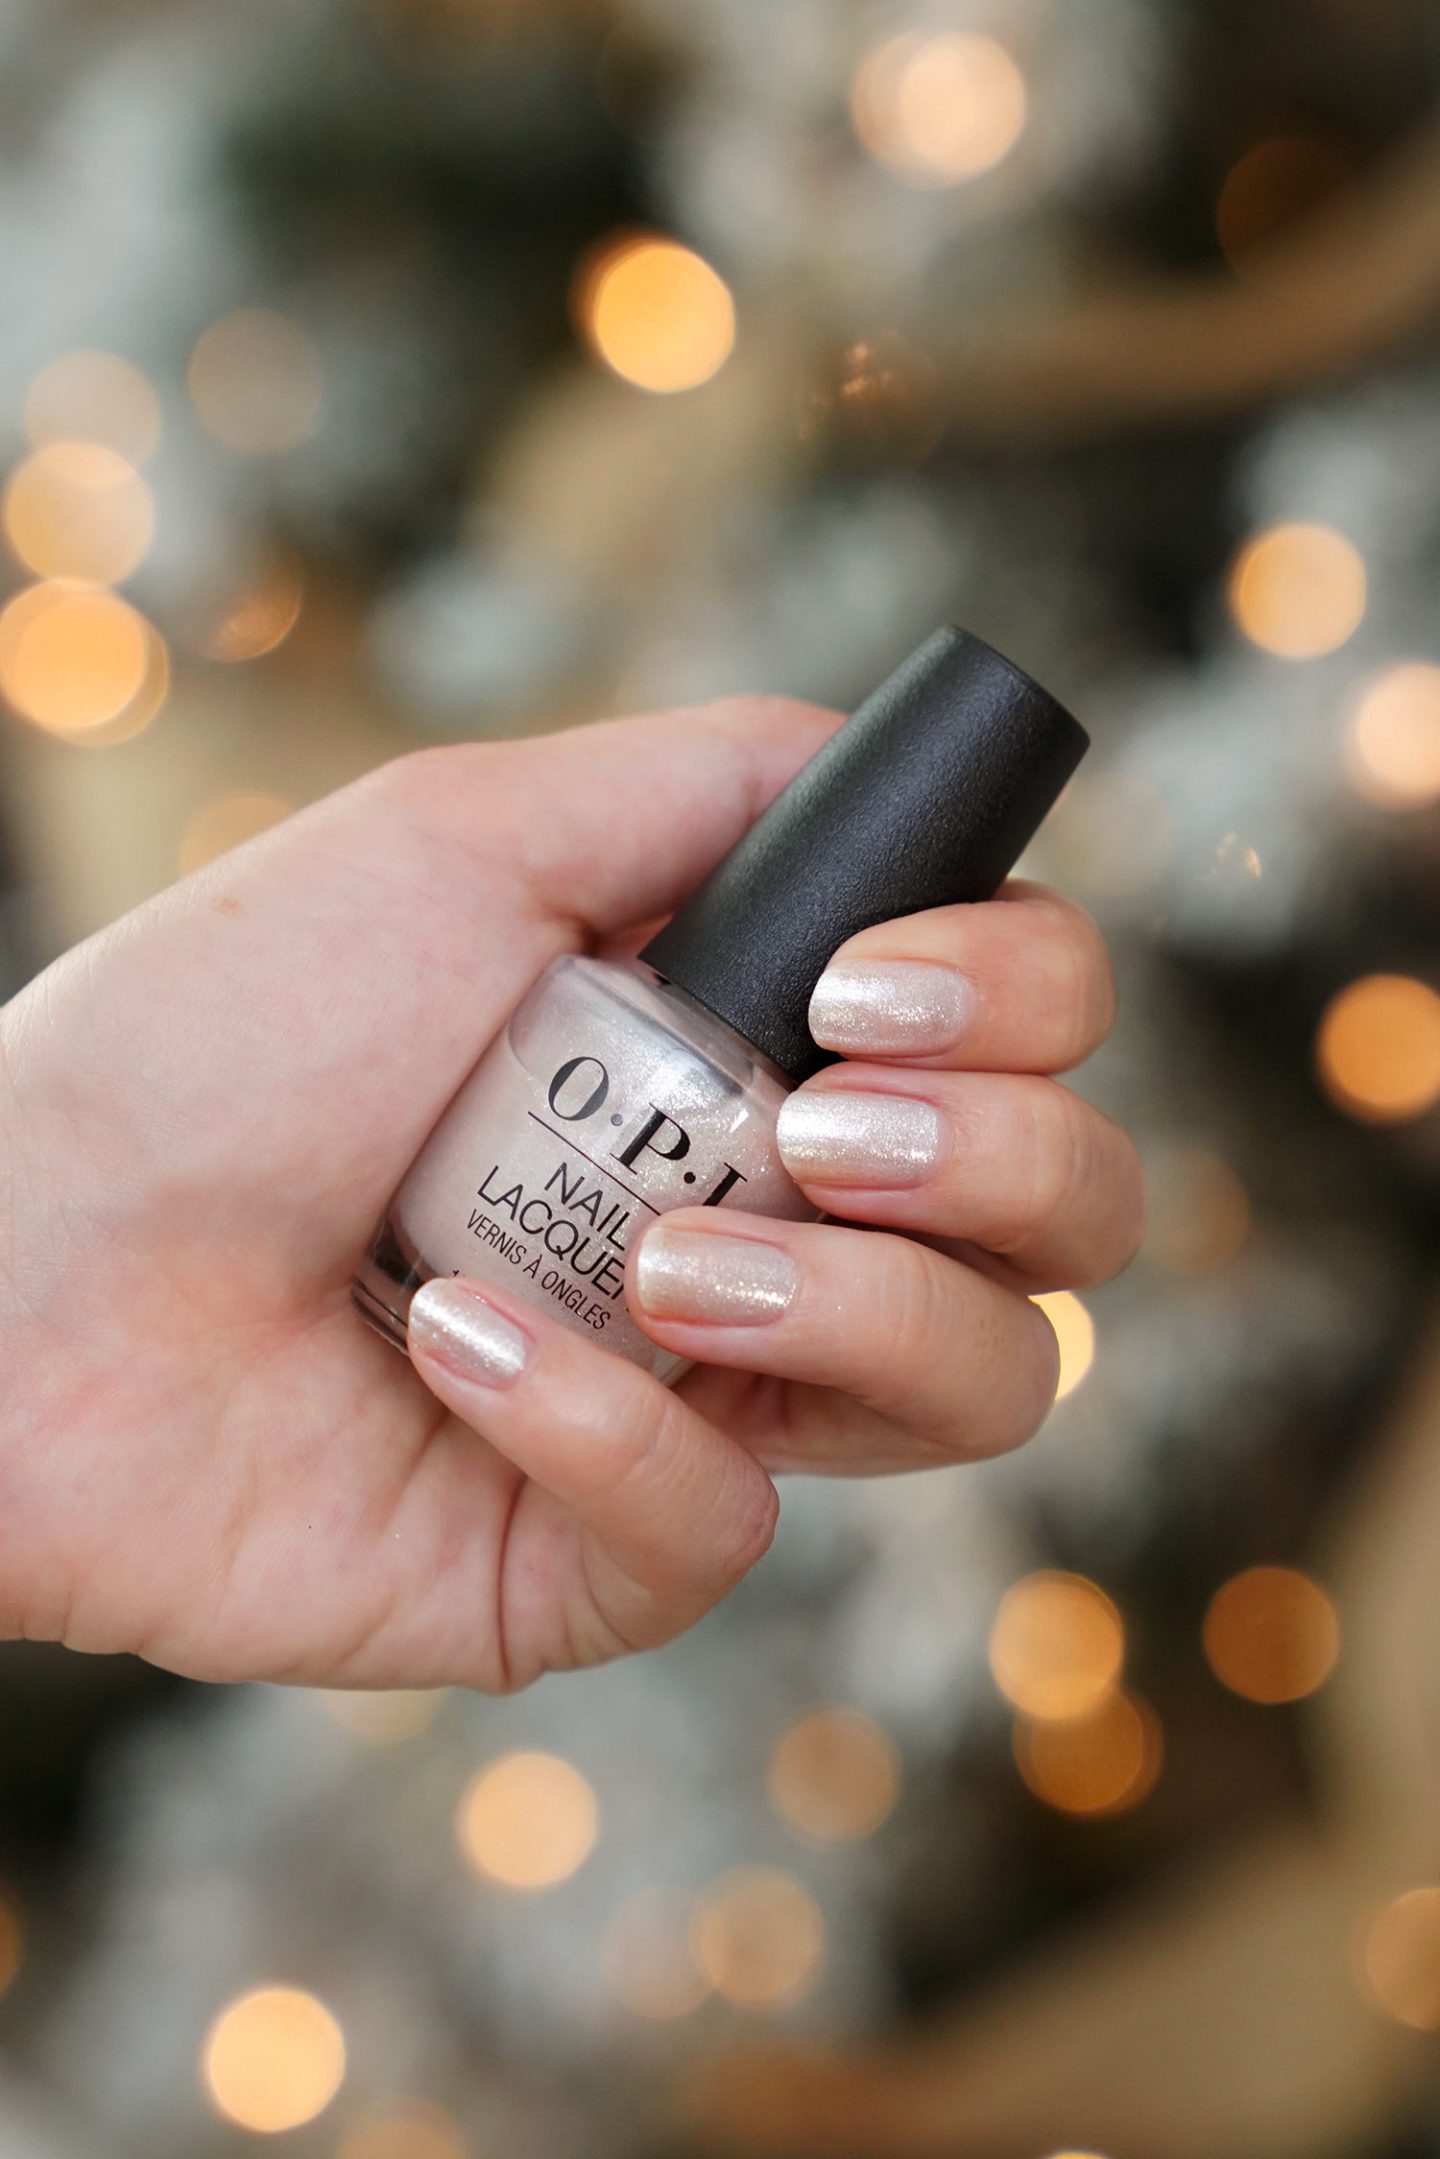 OPI Naughty or Ice?